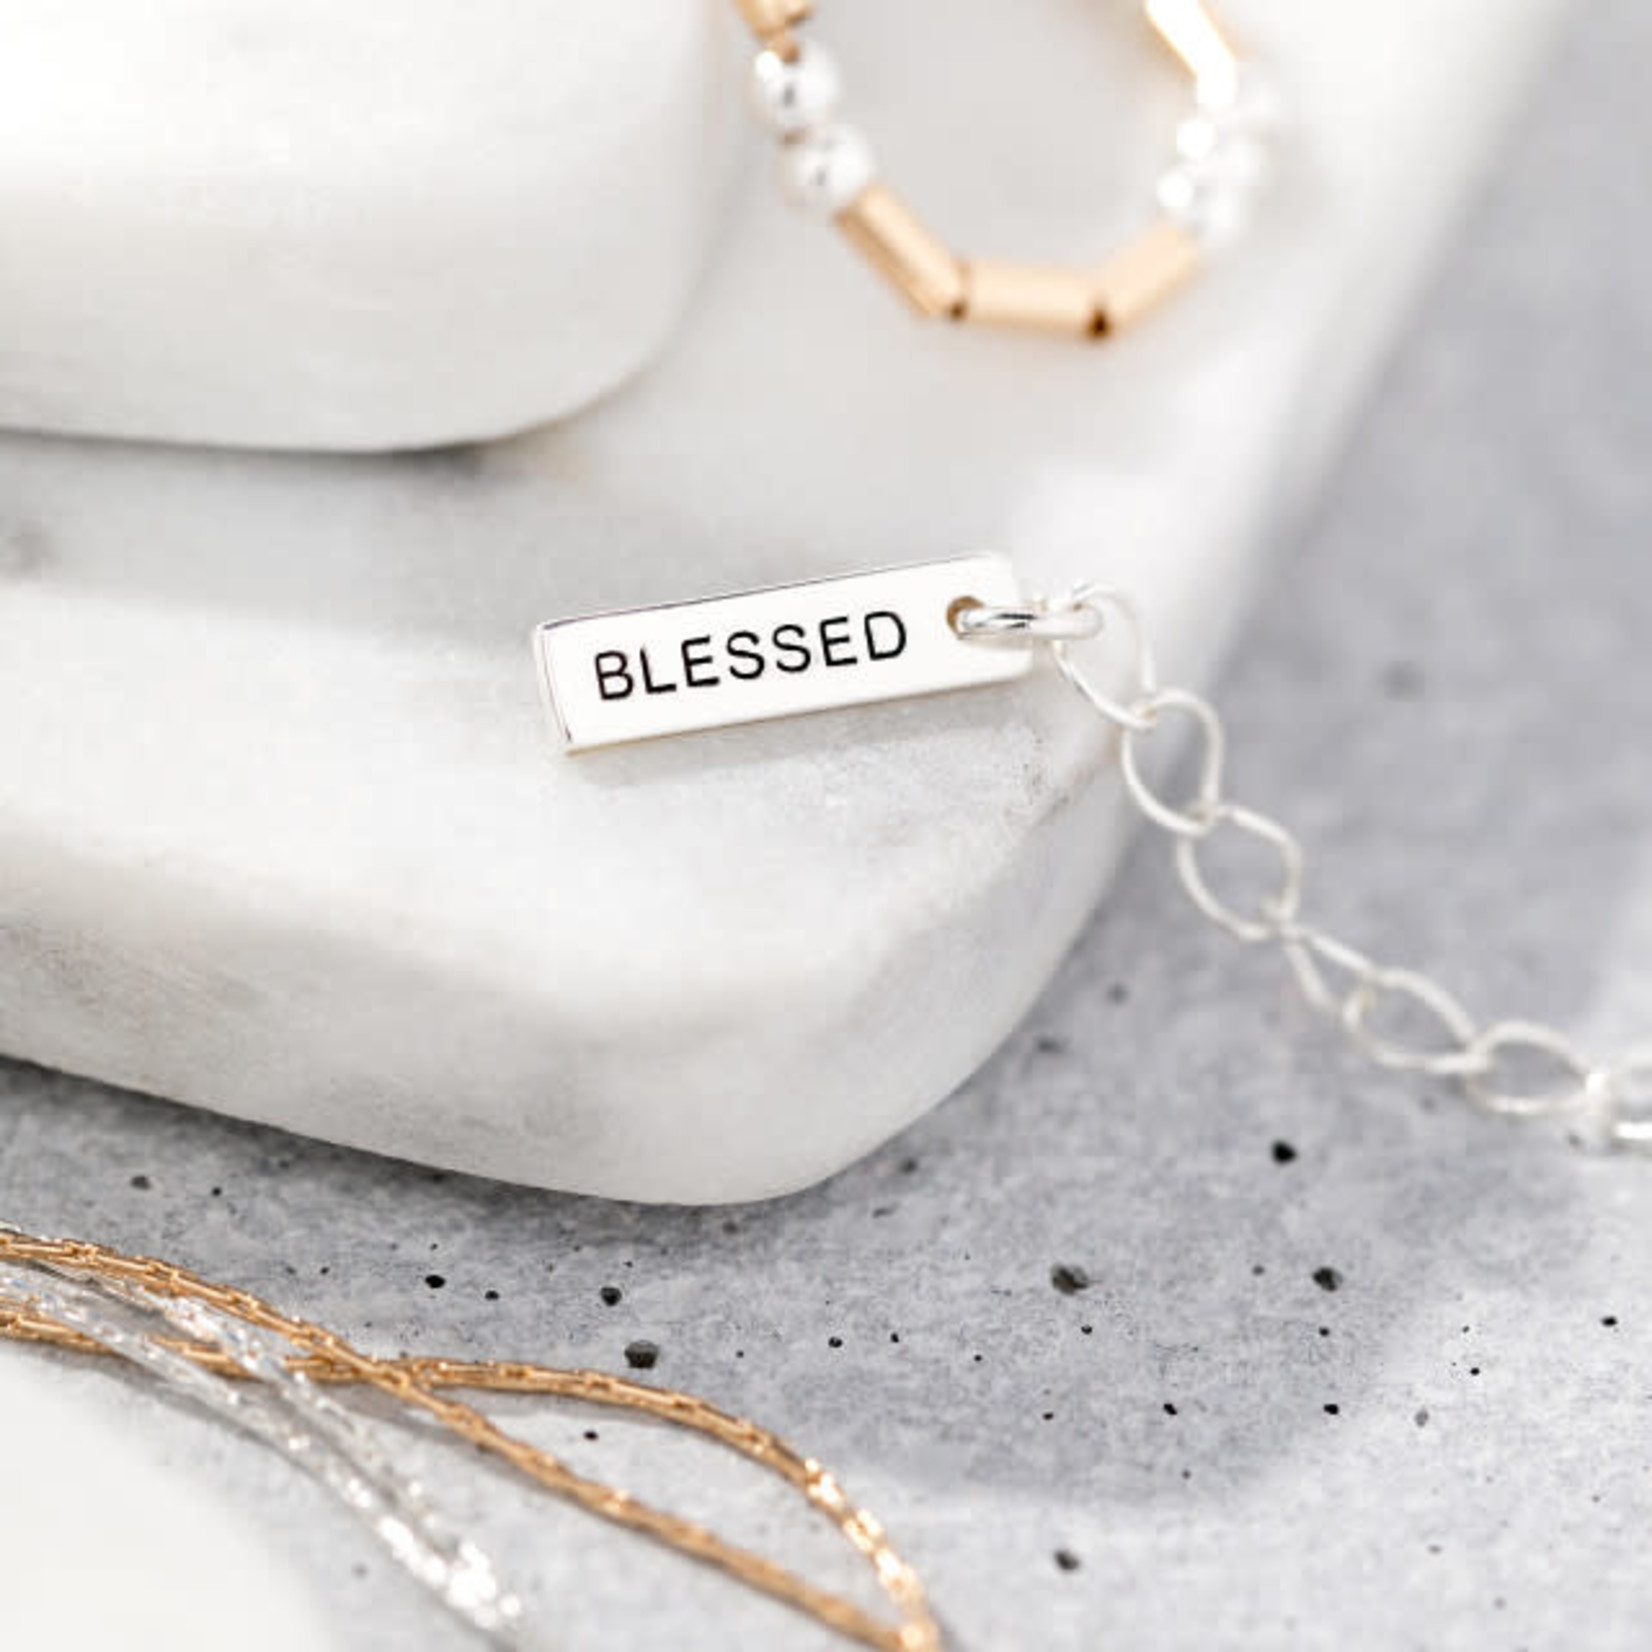 MORSE CODE NECKLACE - YOU'RE BLESSED